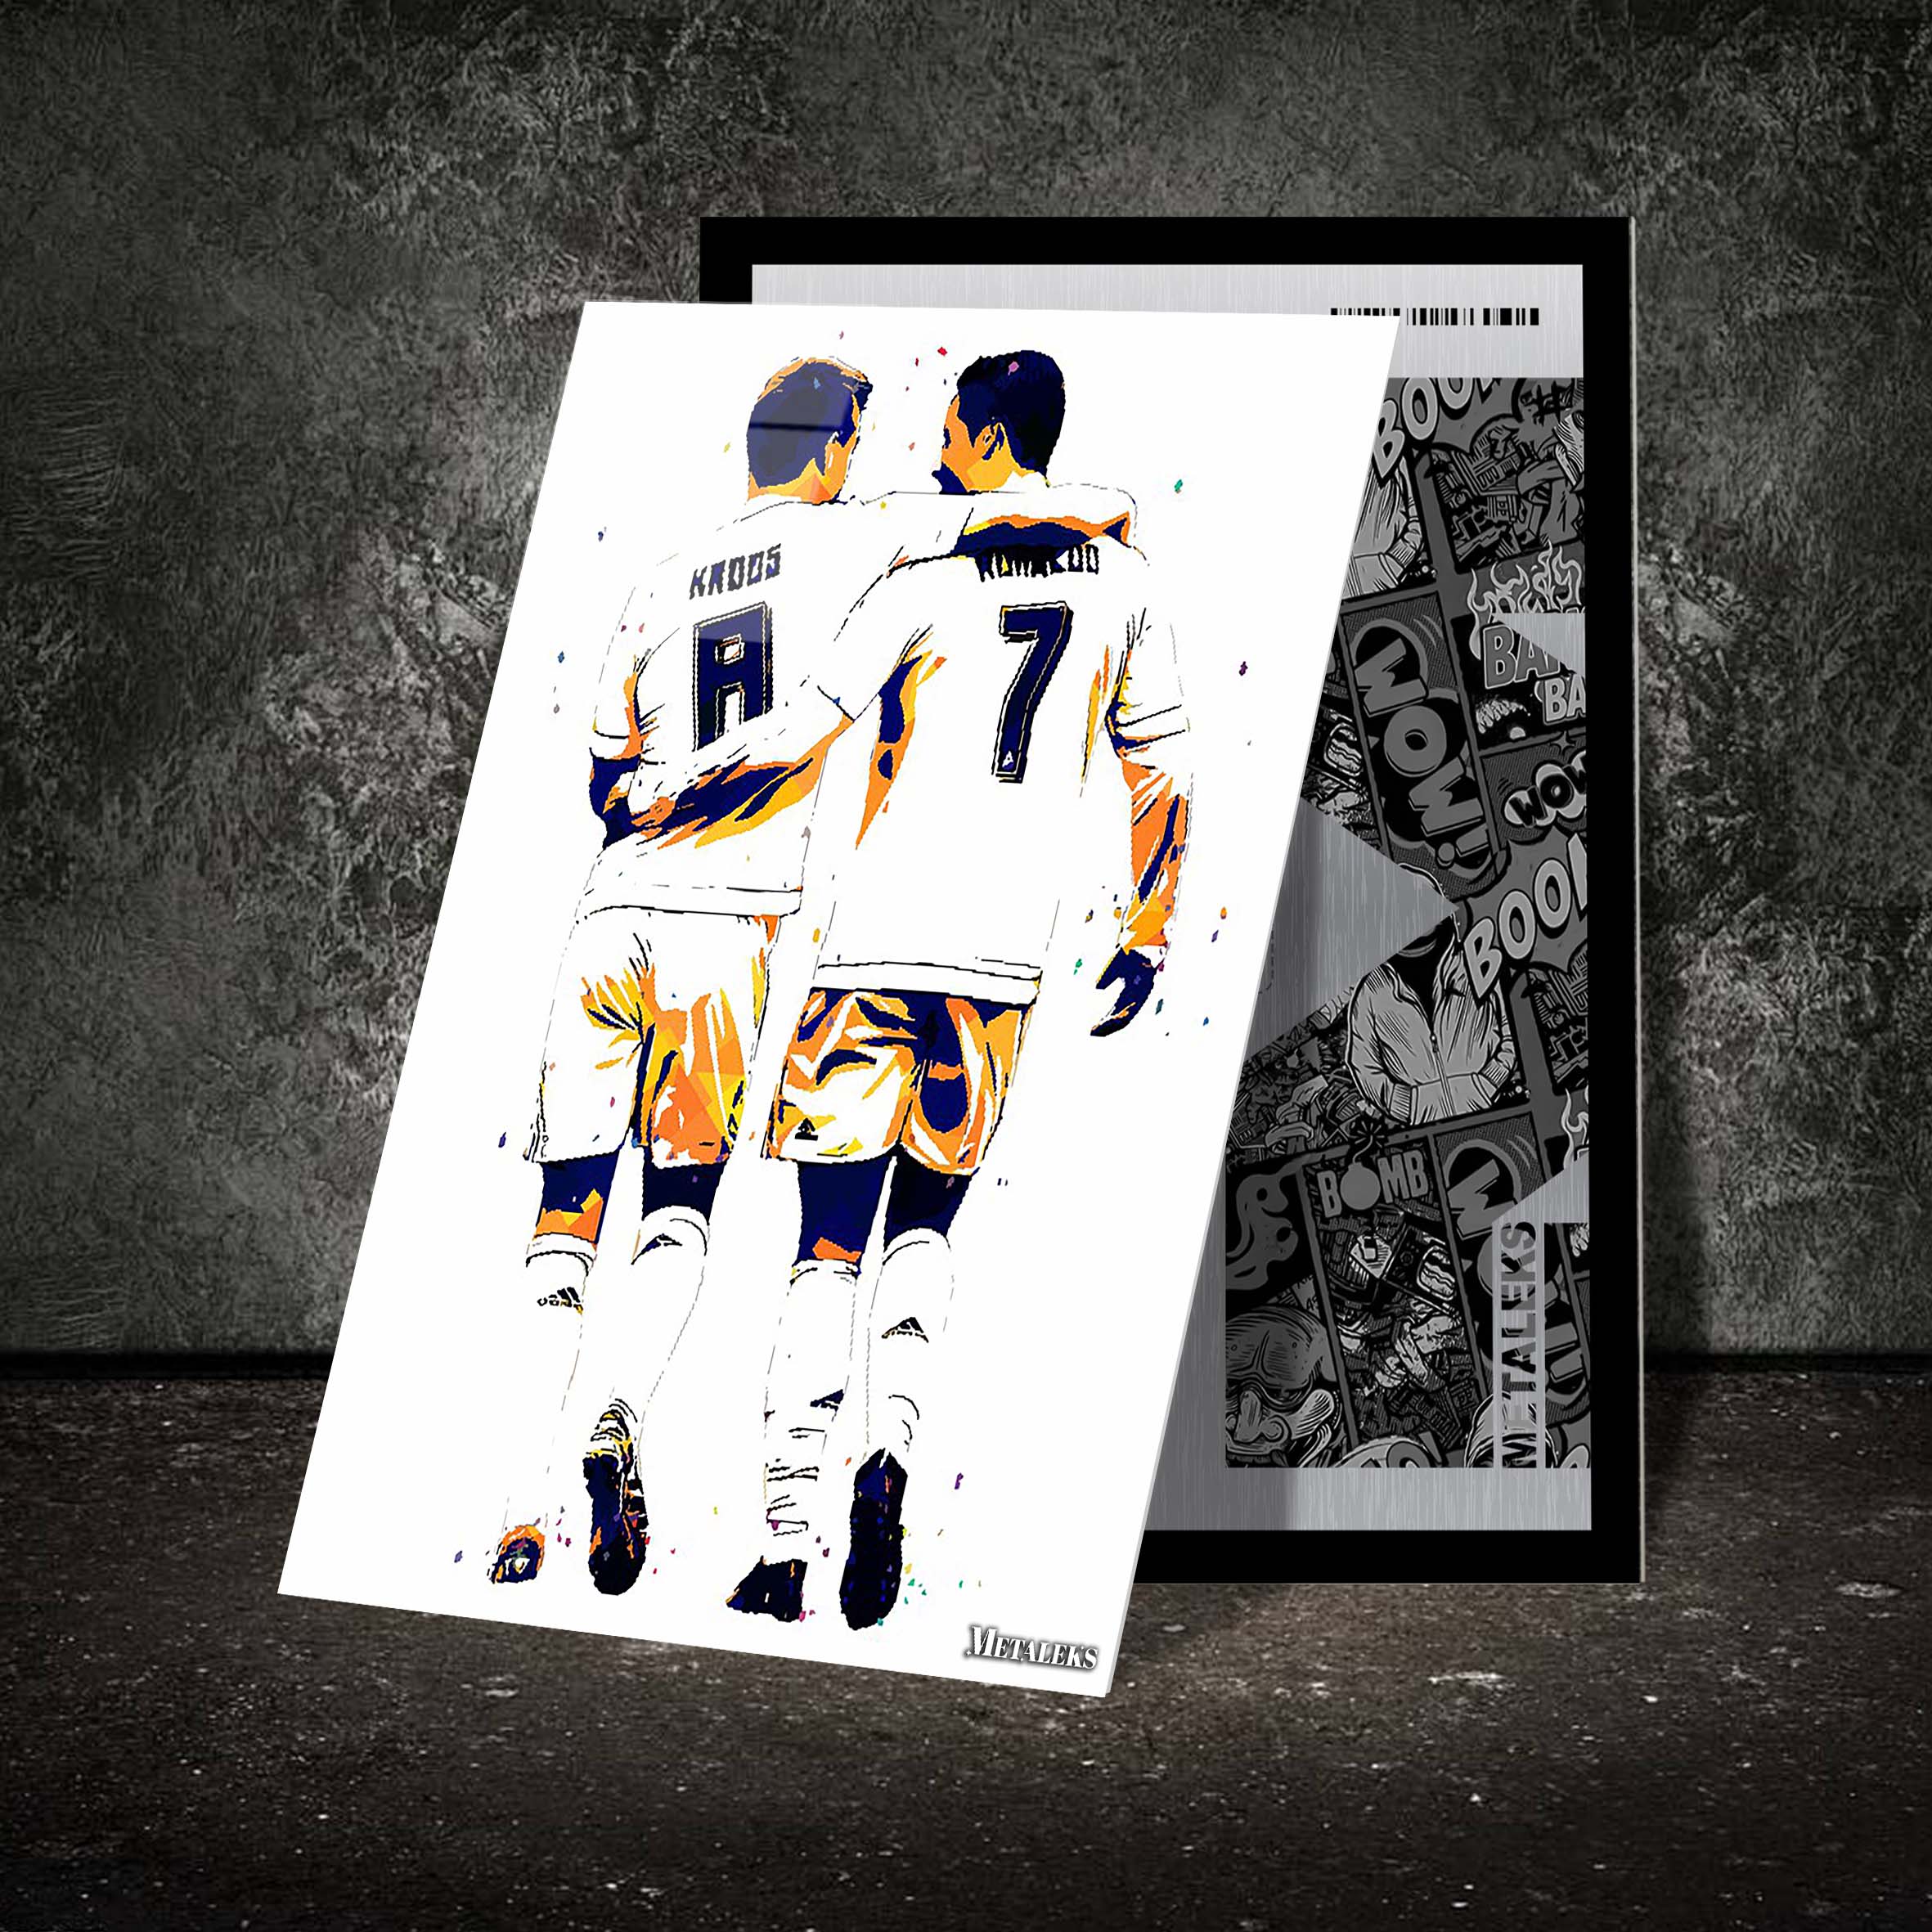 Cristiano Ronaldo and Kroos-designed by @Nadhifsaoqi